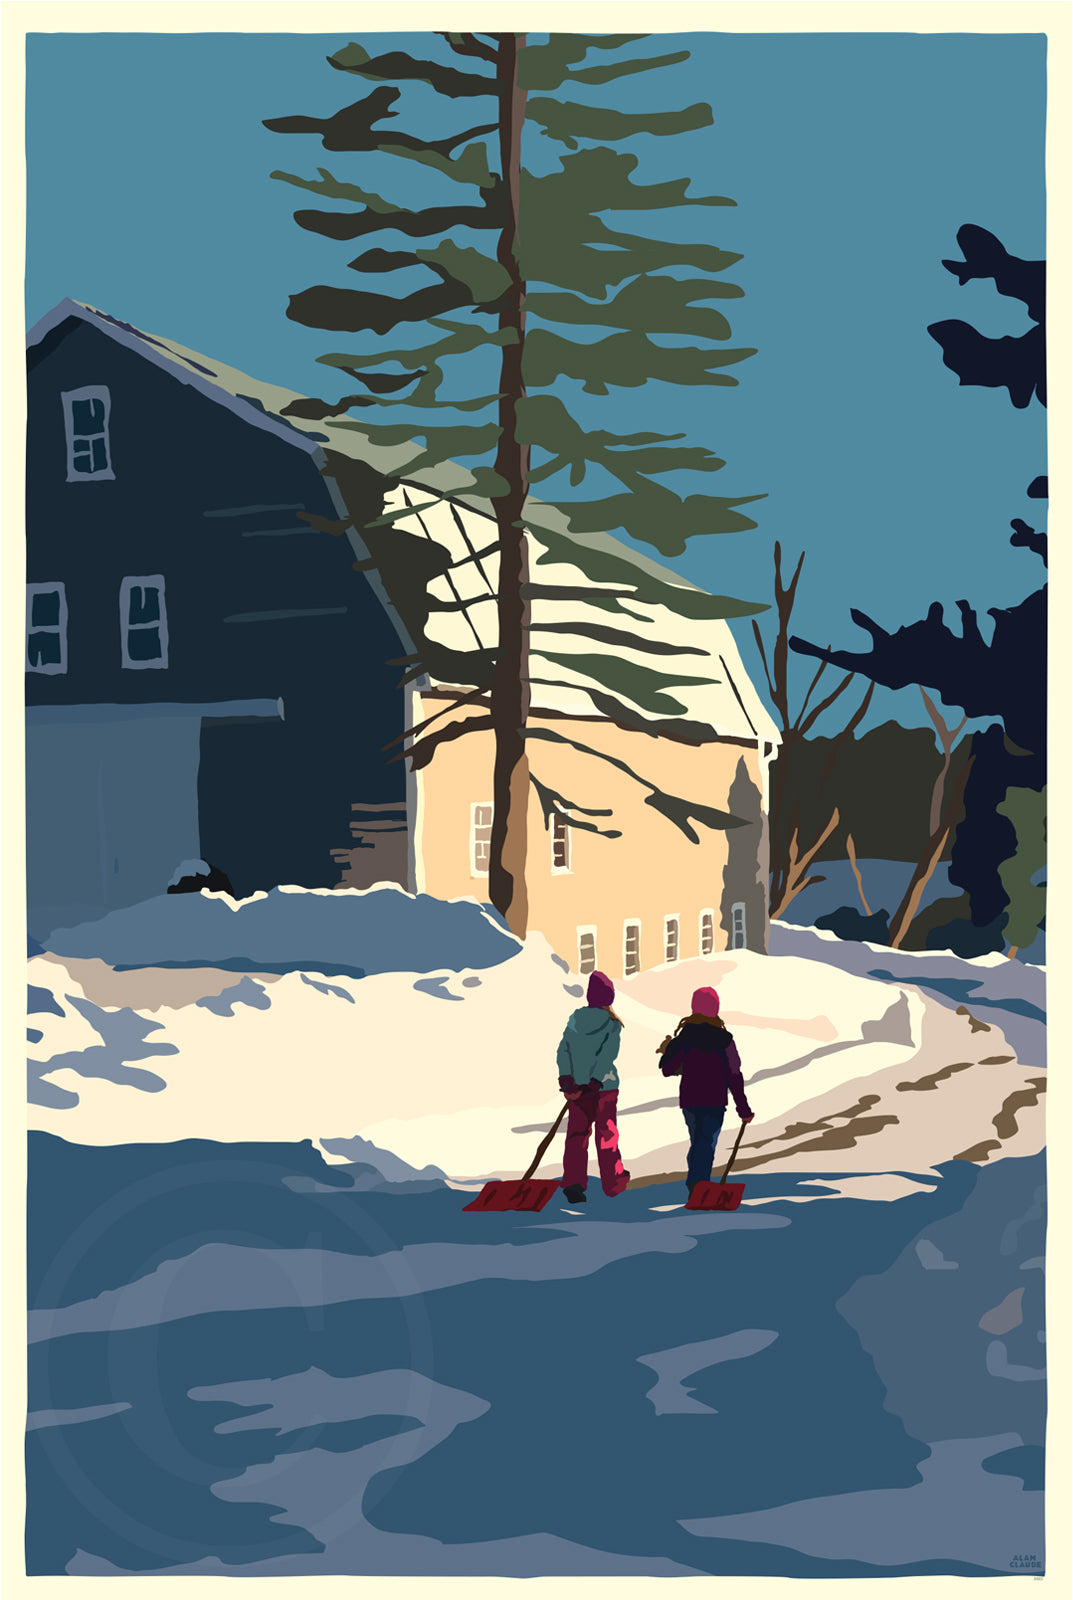 Winter Chores Art Print 24" x 36" Wall Poster By Alan Claude - Maine